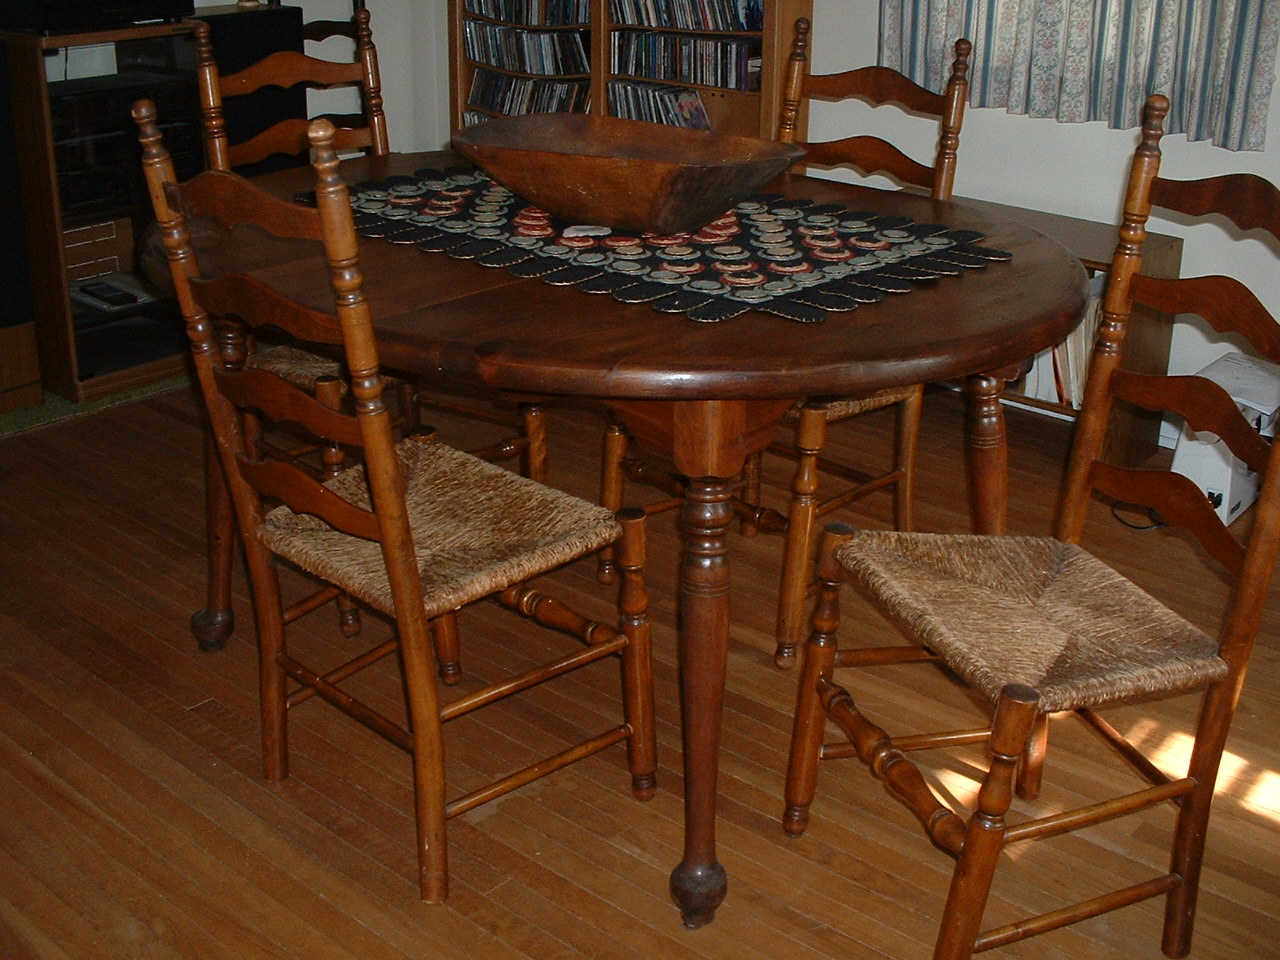 REDUCED - TABLE & 6 CHAIRS